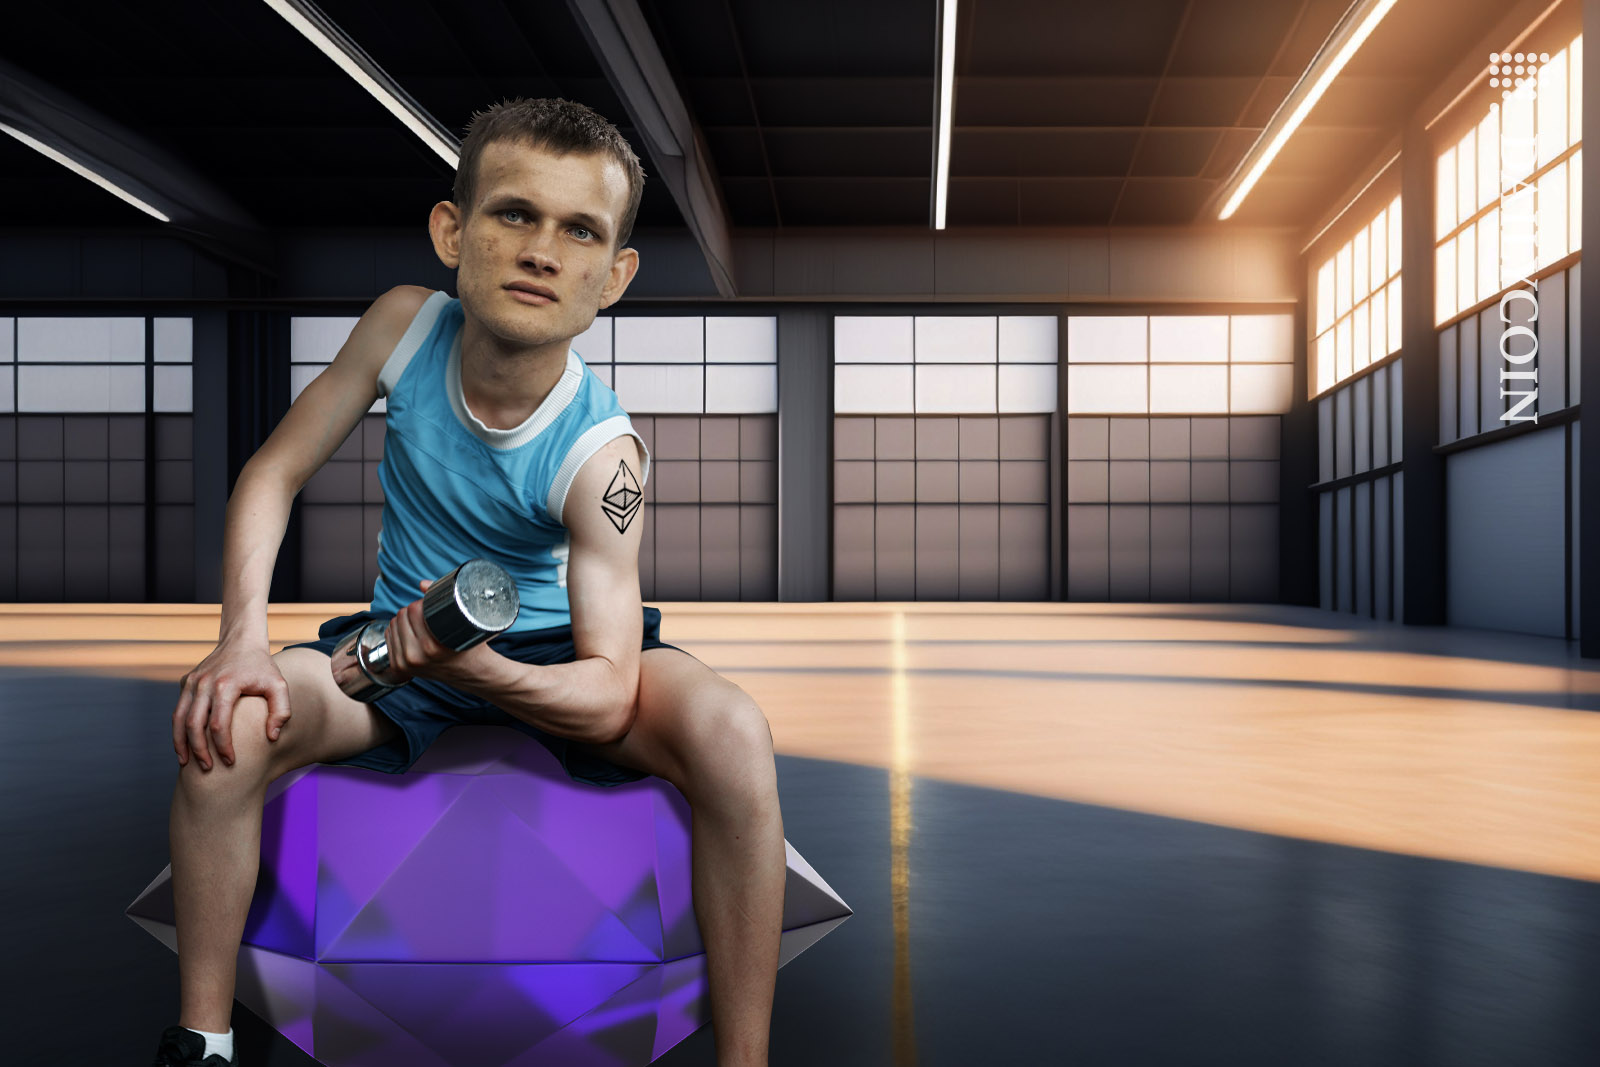 Vitalik Buterin working out in an empty gym, flexing his arm with an Ethereum tattoo on it.